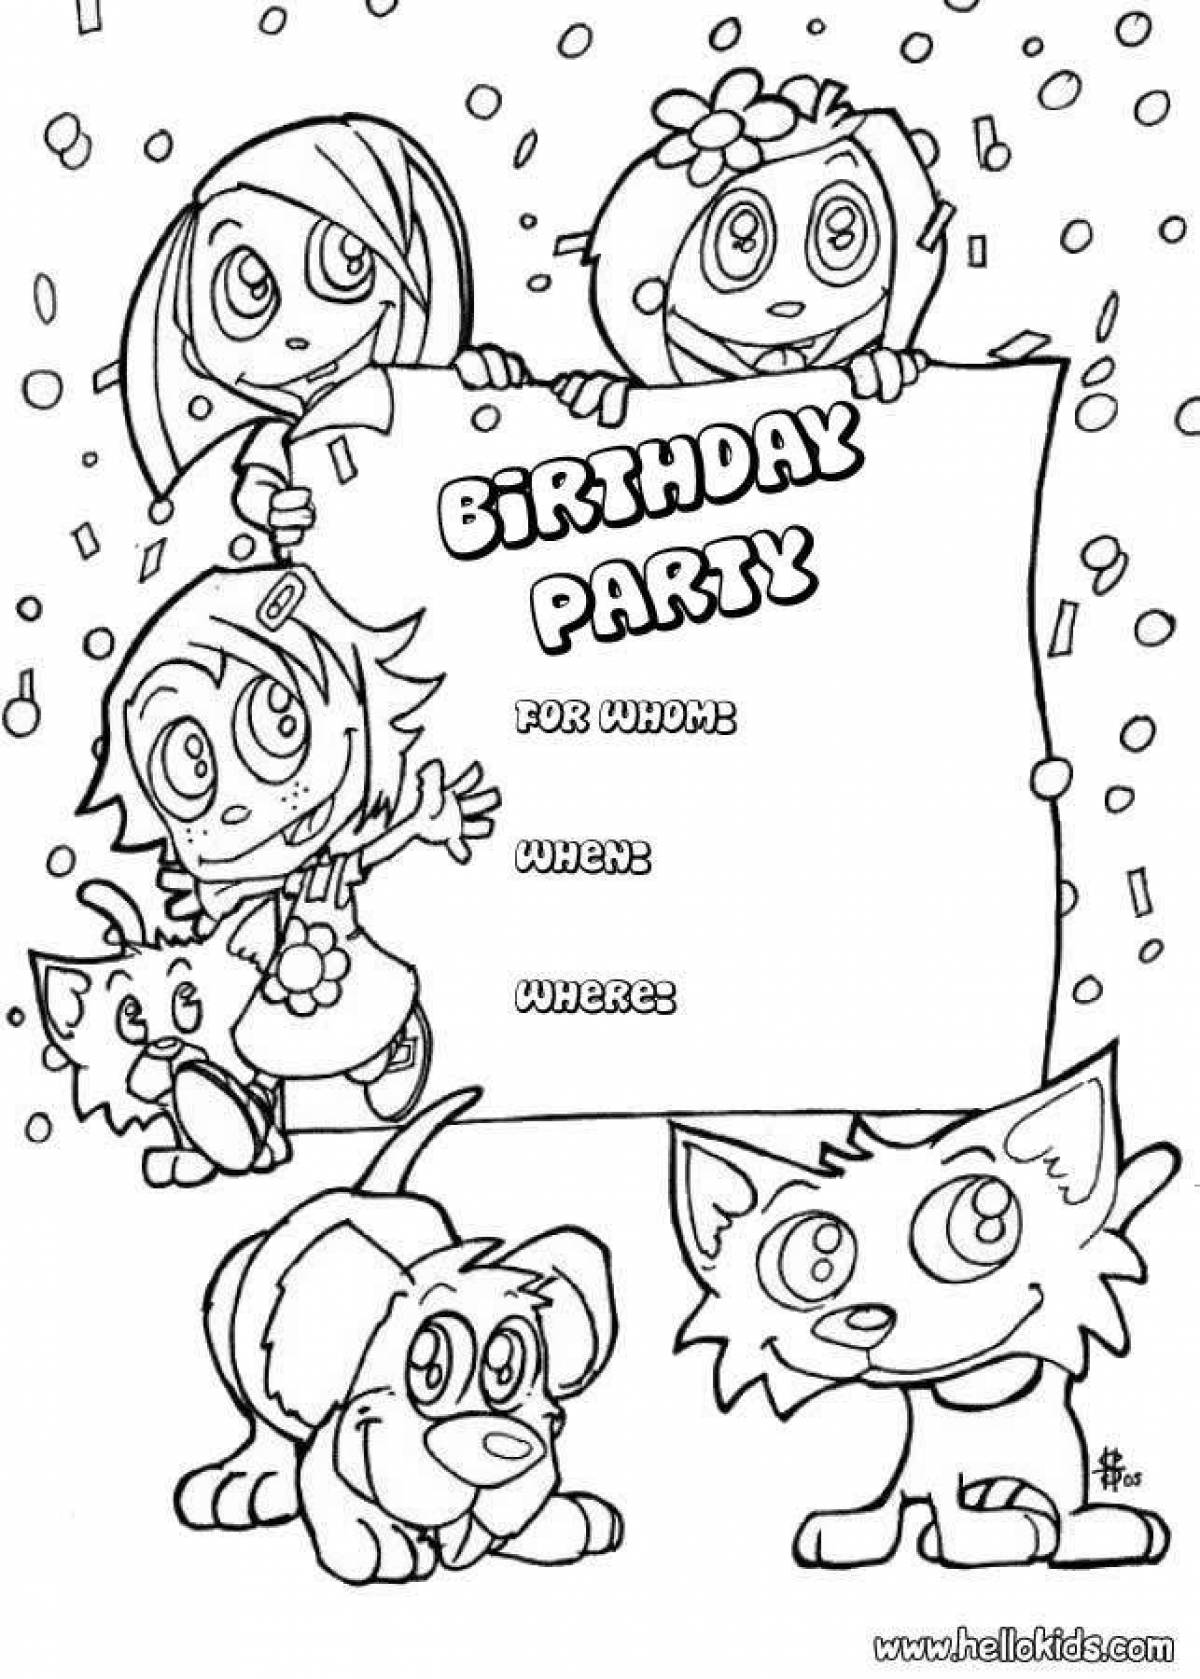 Fabulous birthday invitation coloring page